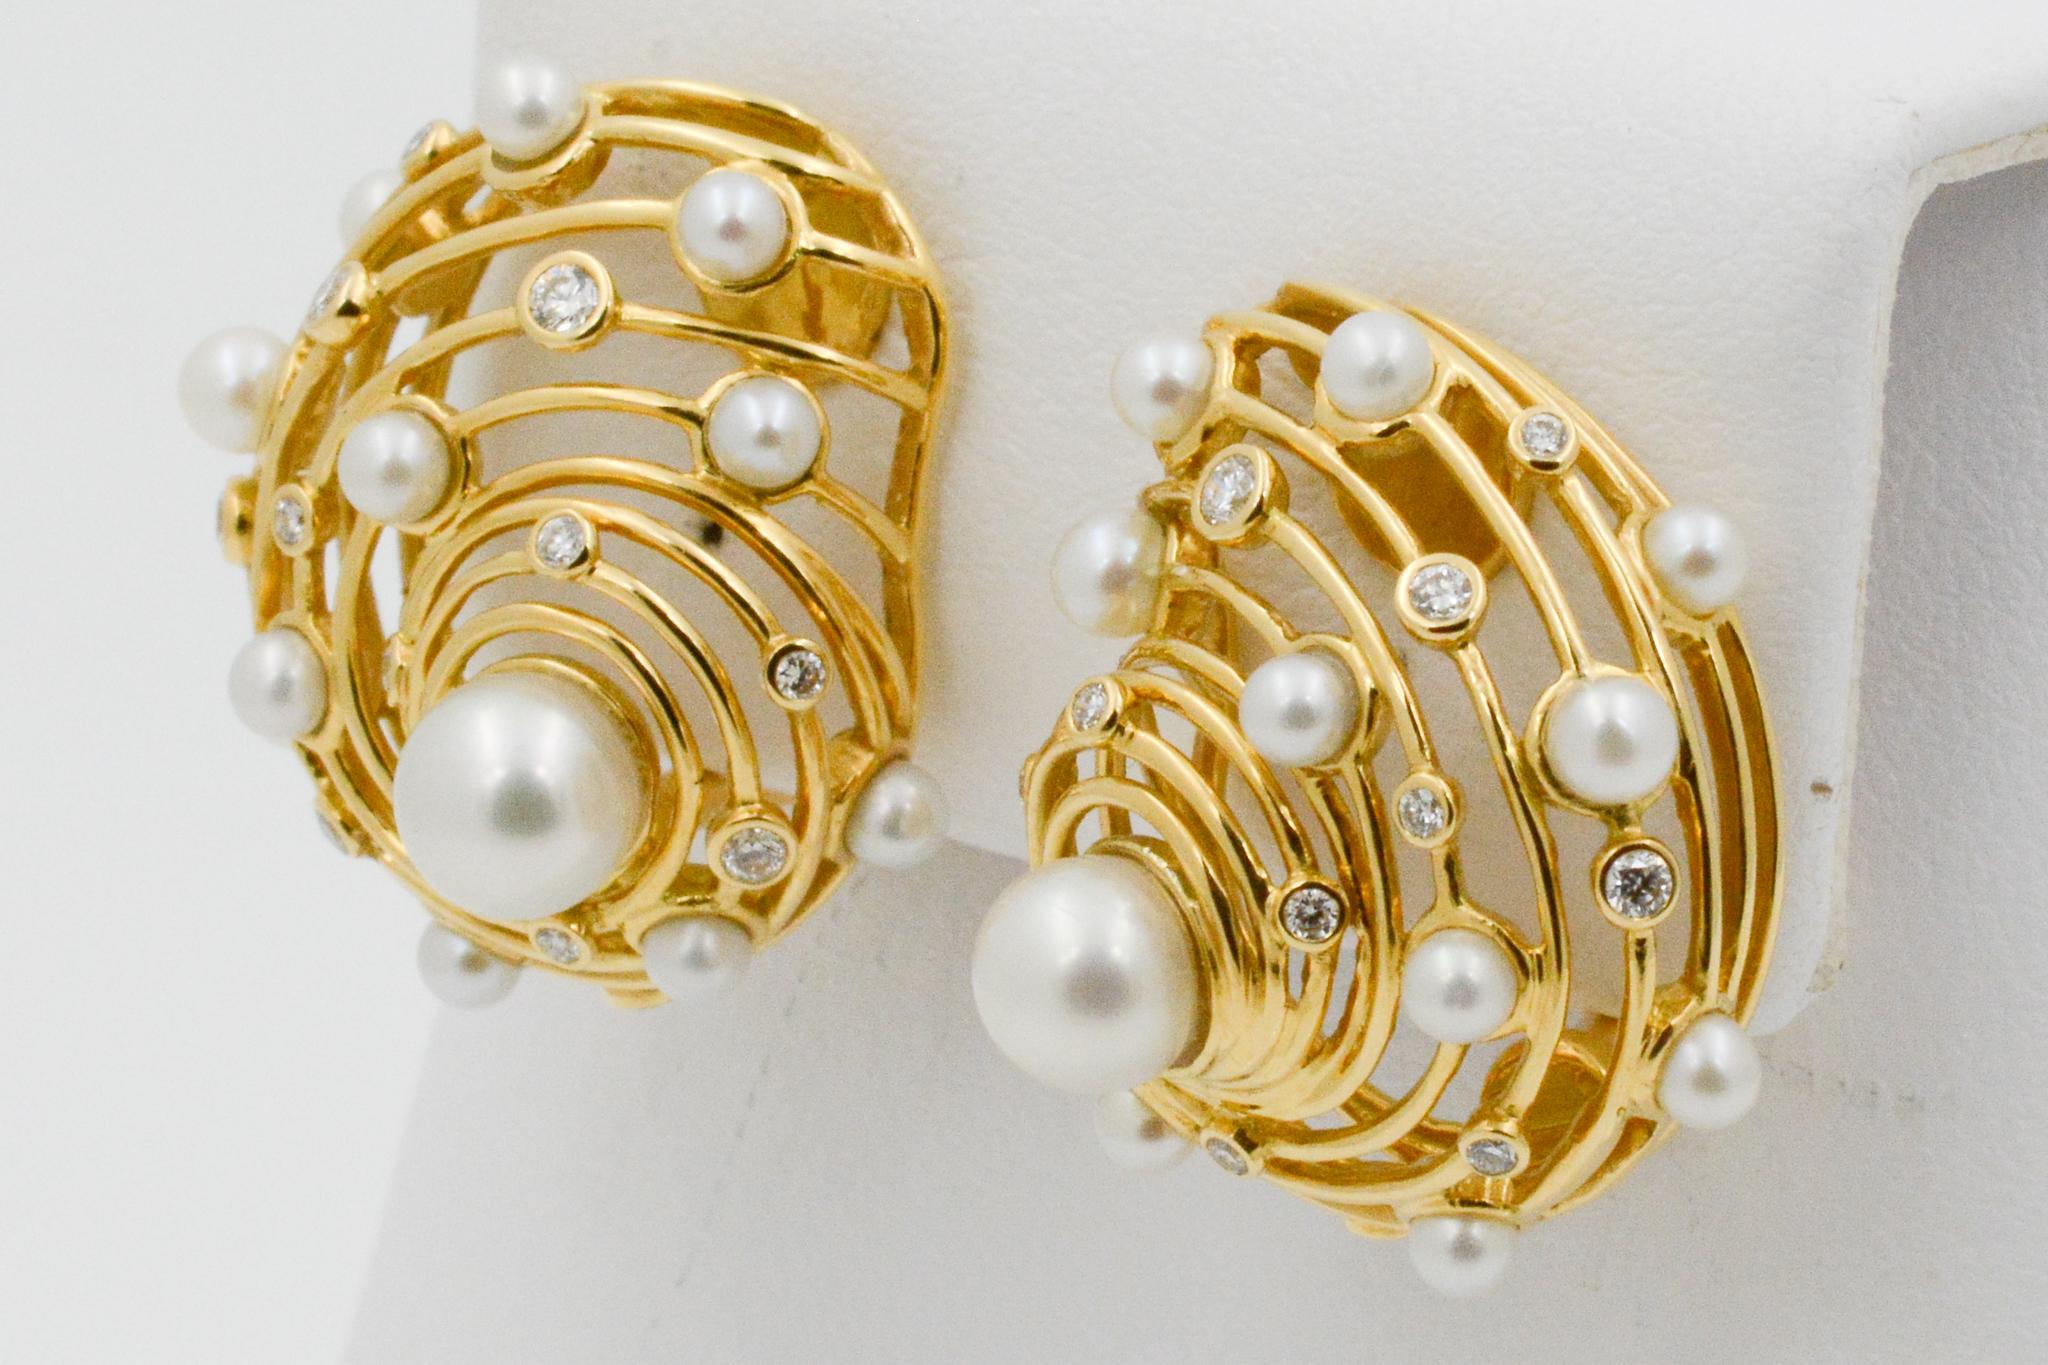 From Trianon, these 18k yellow god Newport clip earrings feature a wire shell design with 24 white pearls and 24 round diamond accents weighing .27ctw. Signed Triannon
